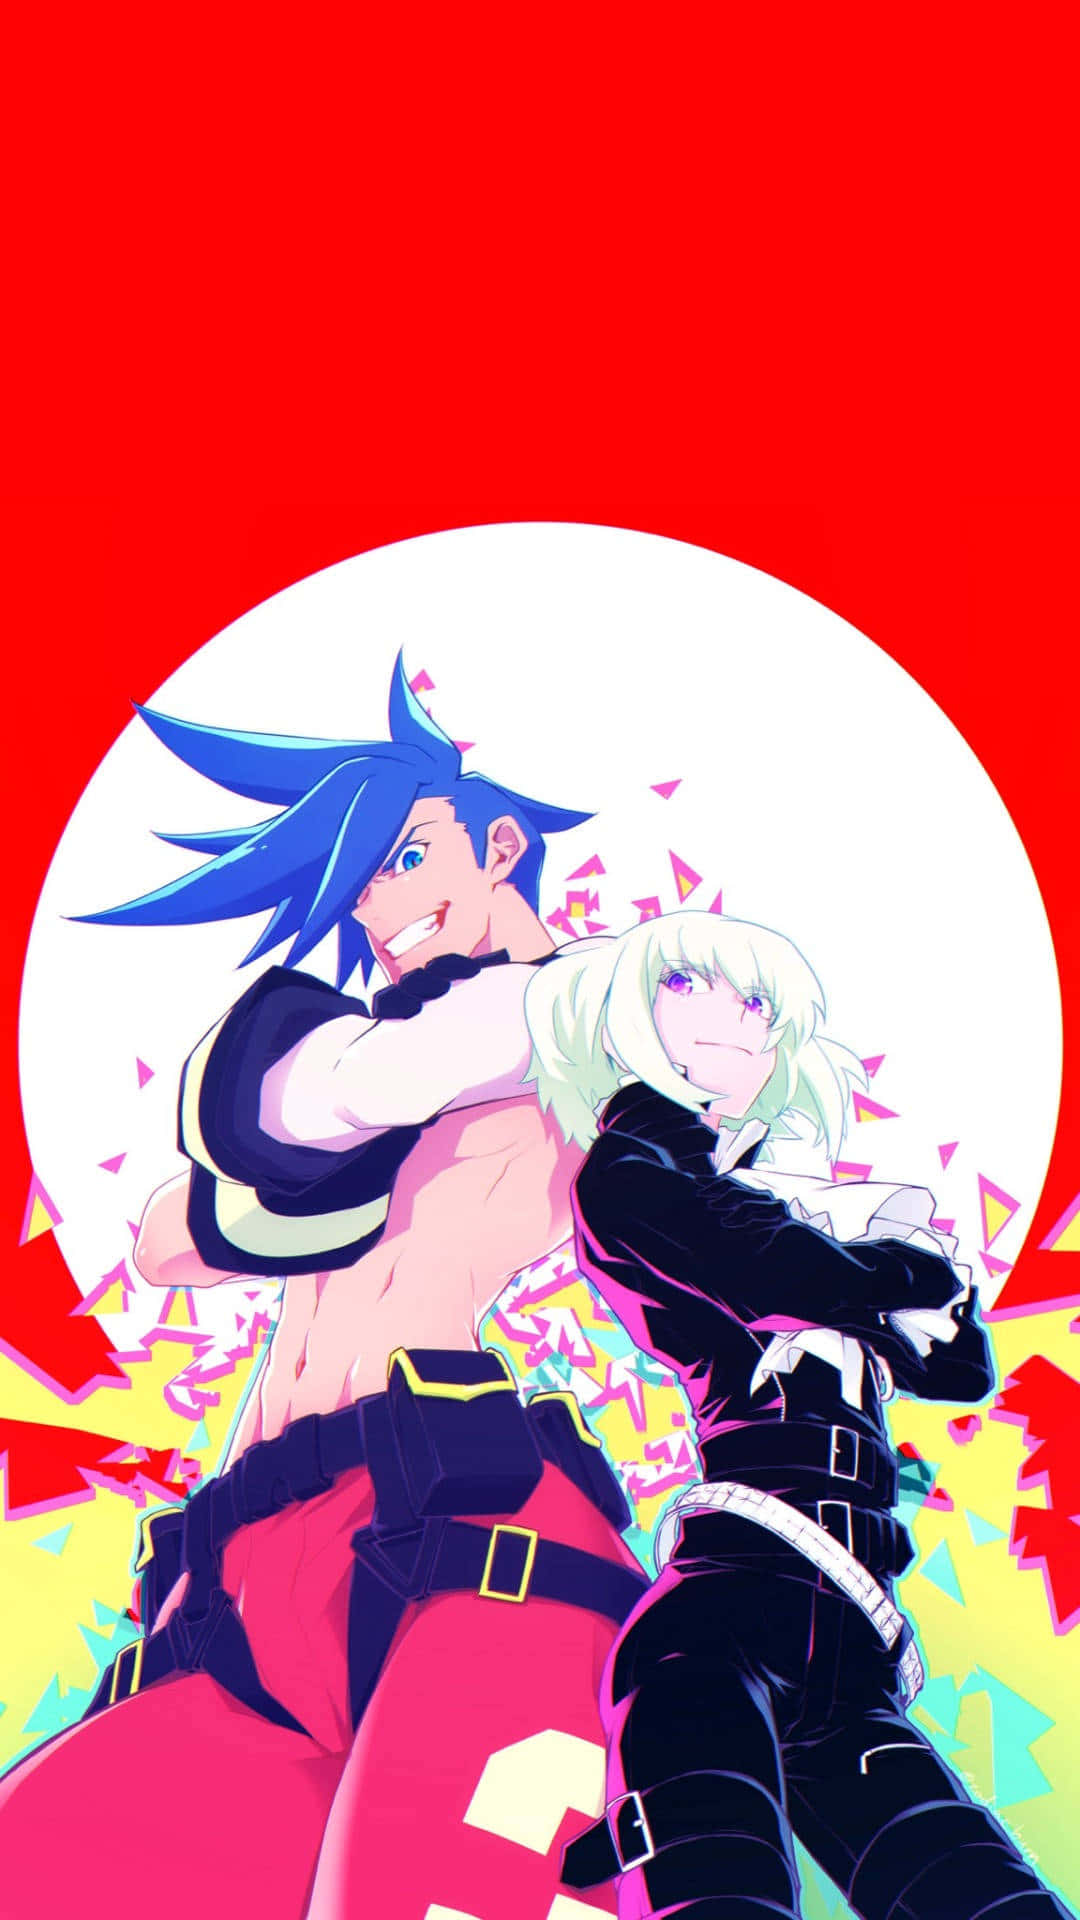 Dive into the non-stop action and intense battles of Promare!